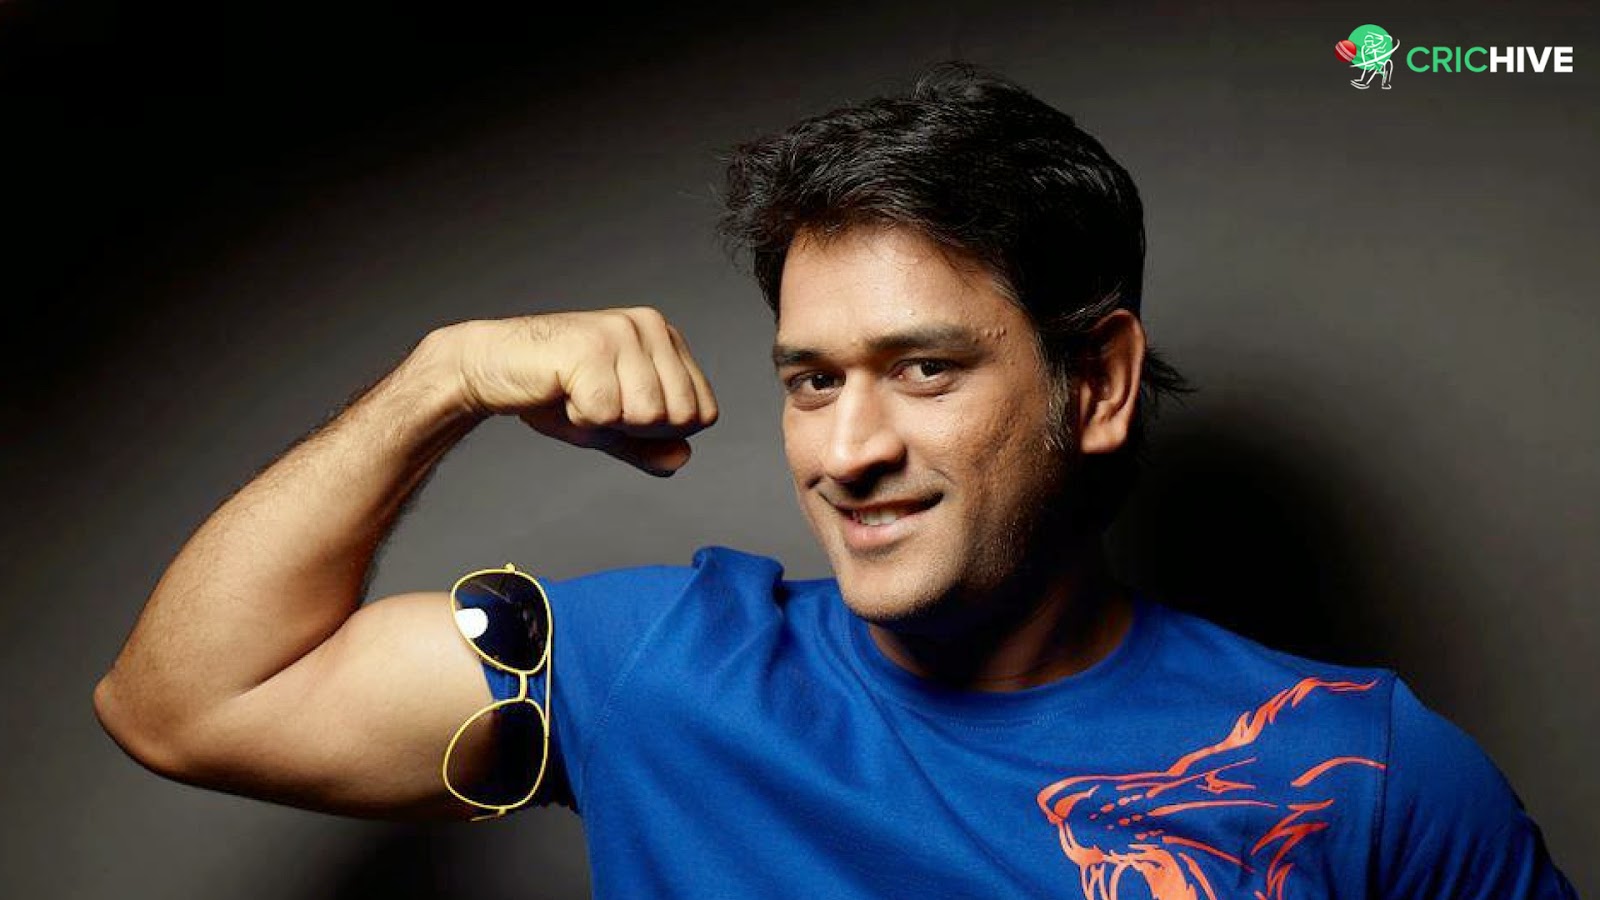 Csk Hd Wallpapers Ch12c - Most Handsome Cricketer In India - HD Wallpaper 